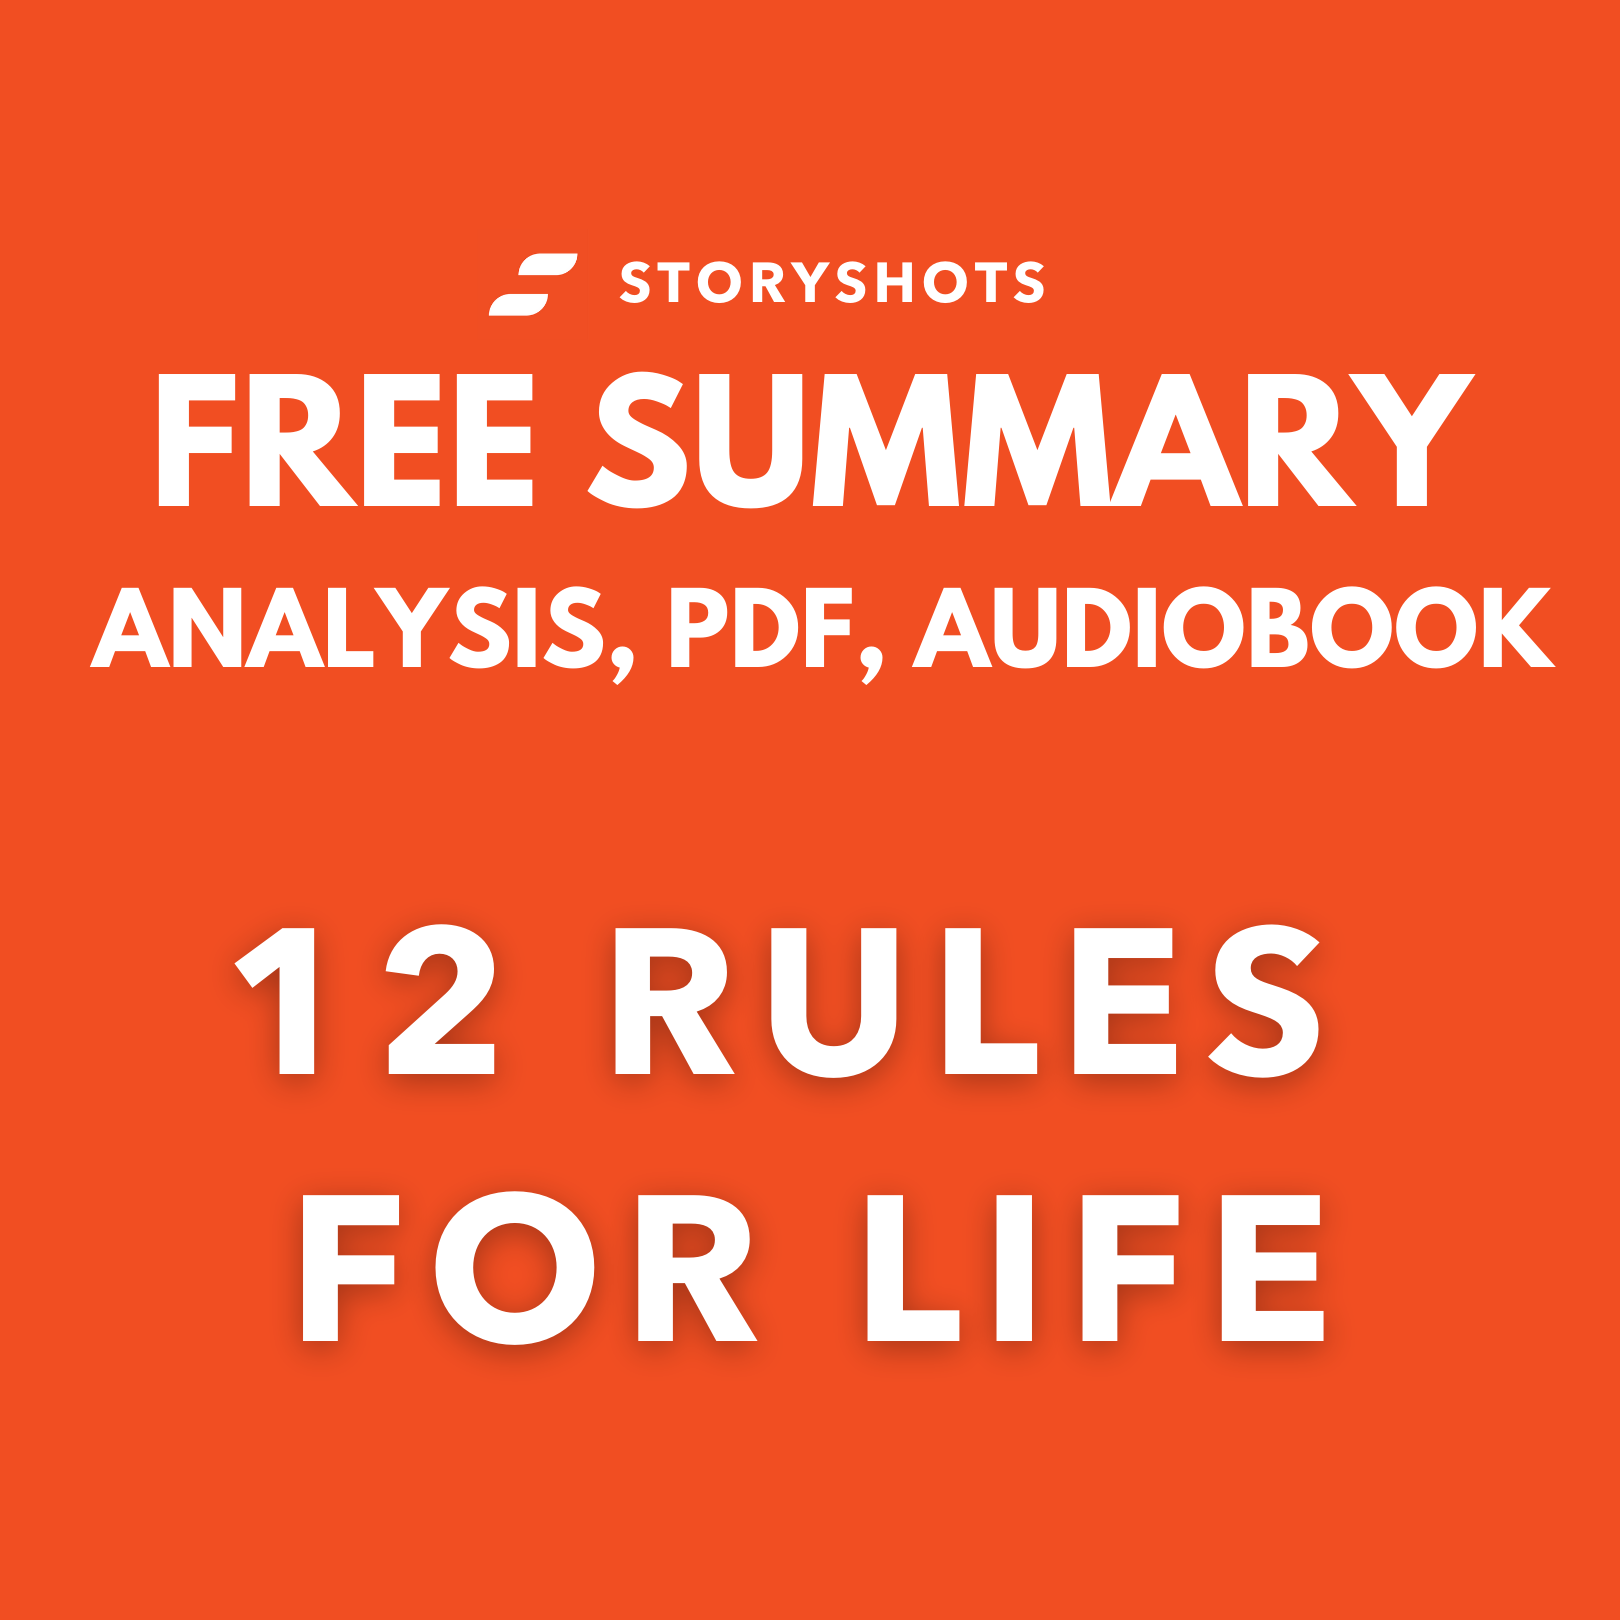 12 rules for life audiobook free download